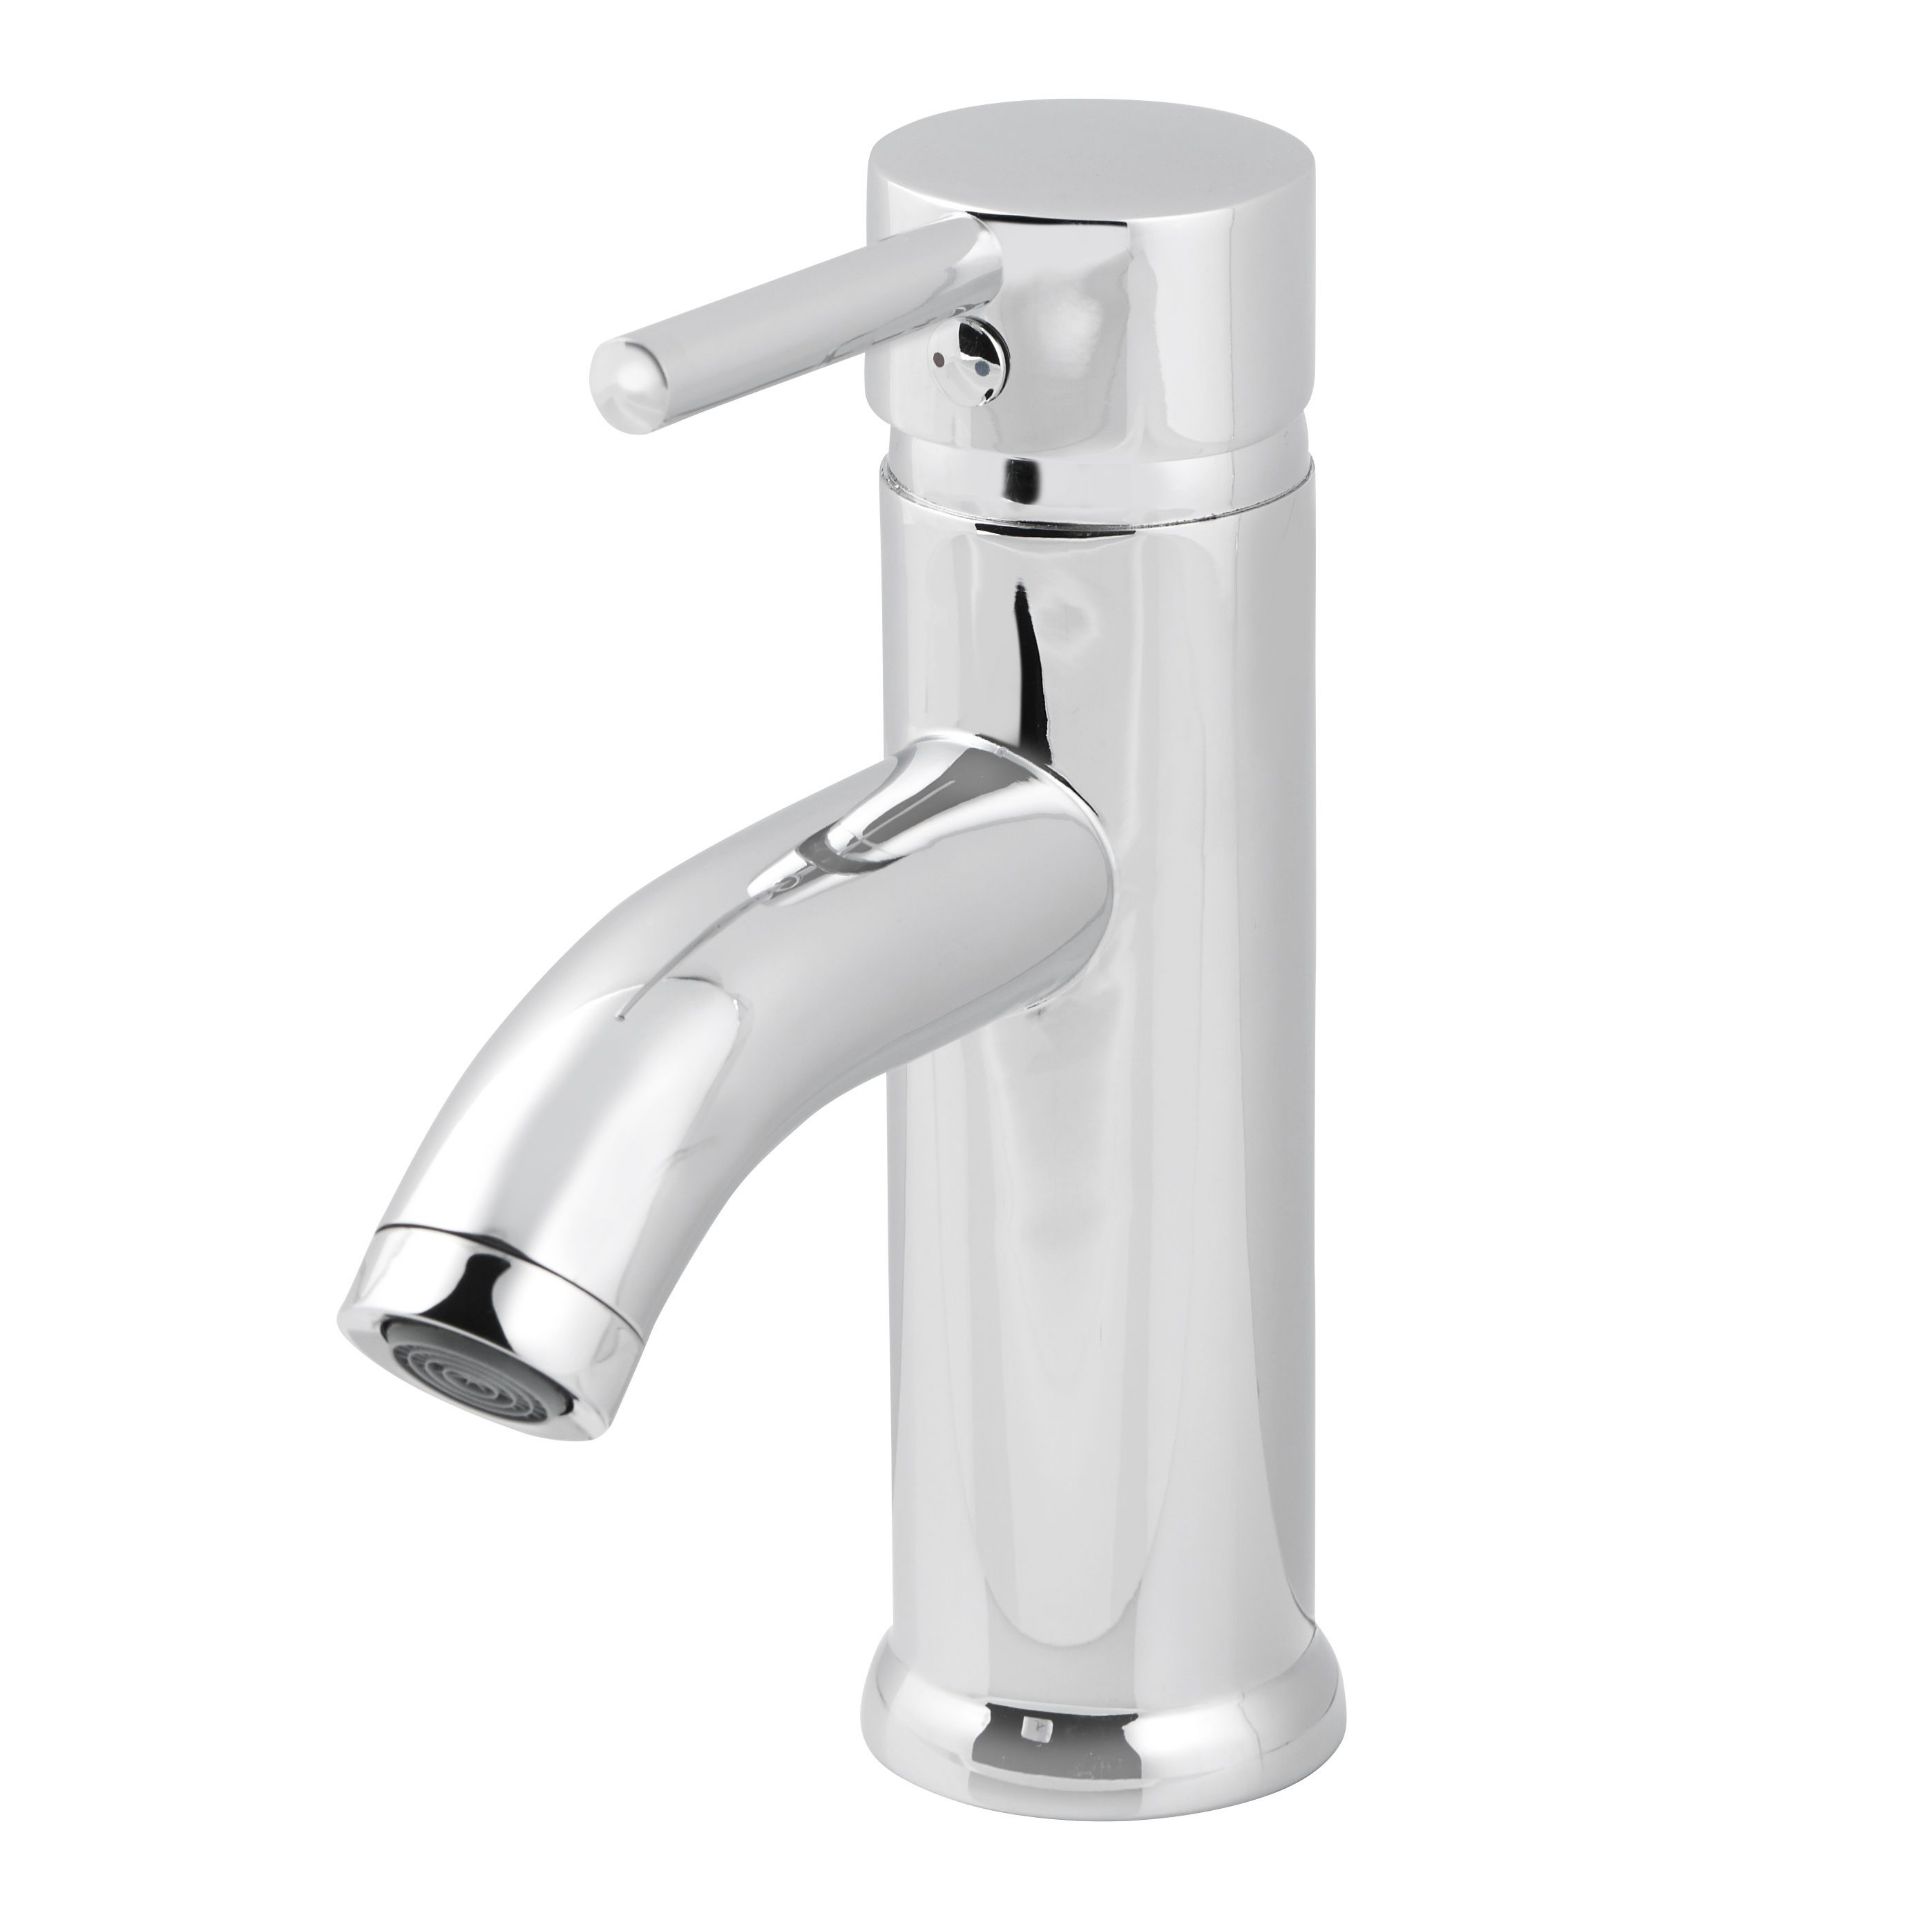 (KH11) Hoffell 1 lever Chrome-plated Contemporary Basin Mono mixer Tap. This contemporary styl...